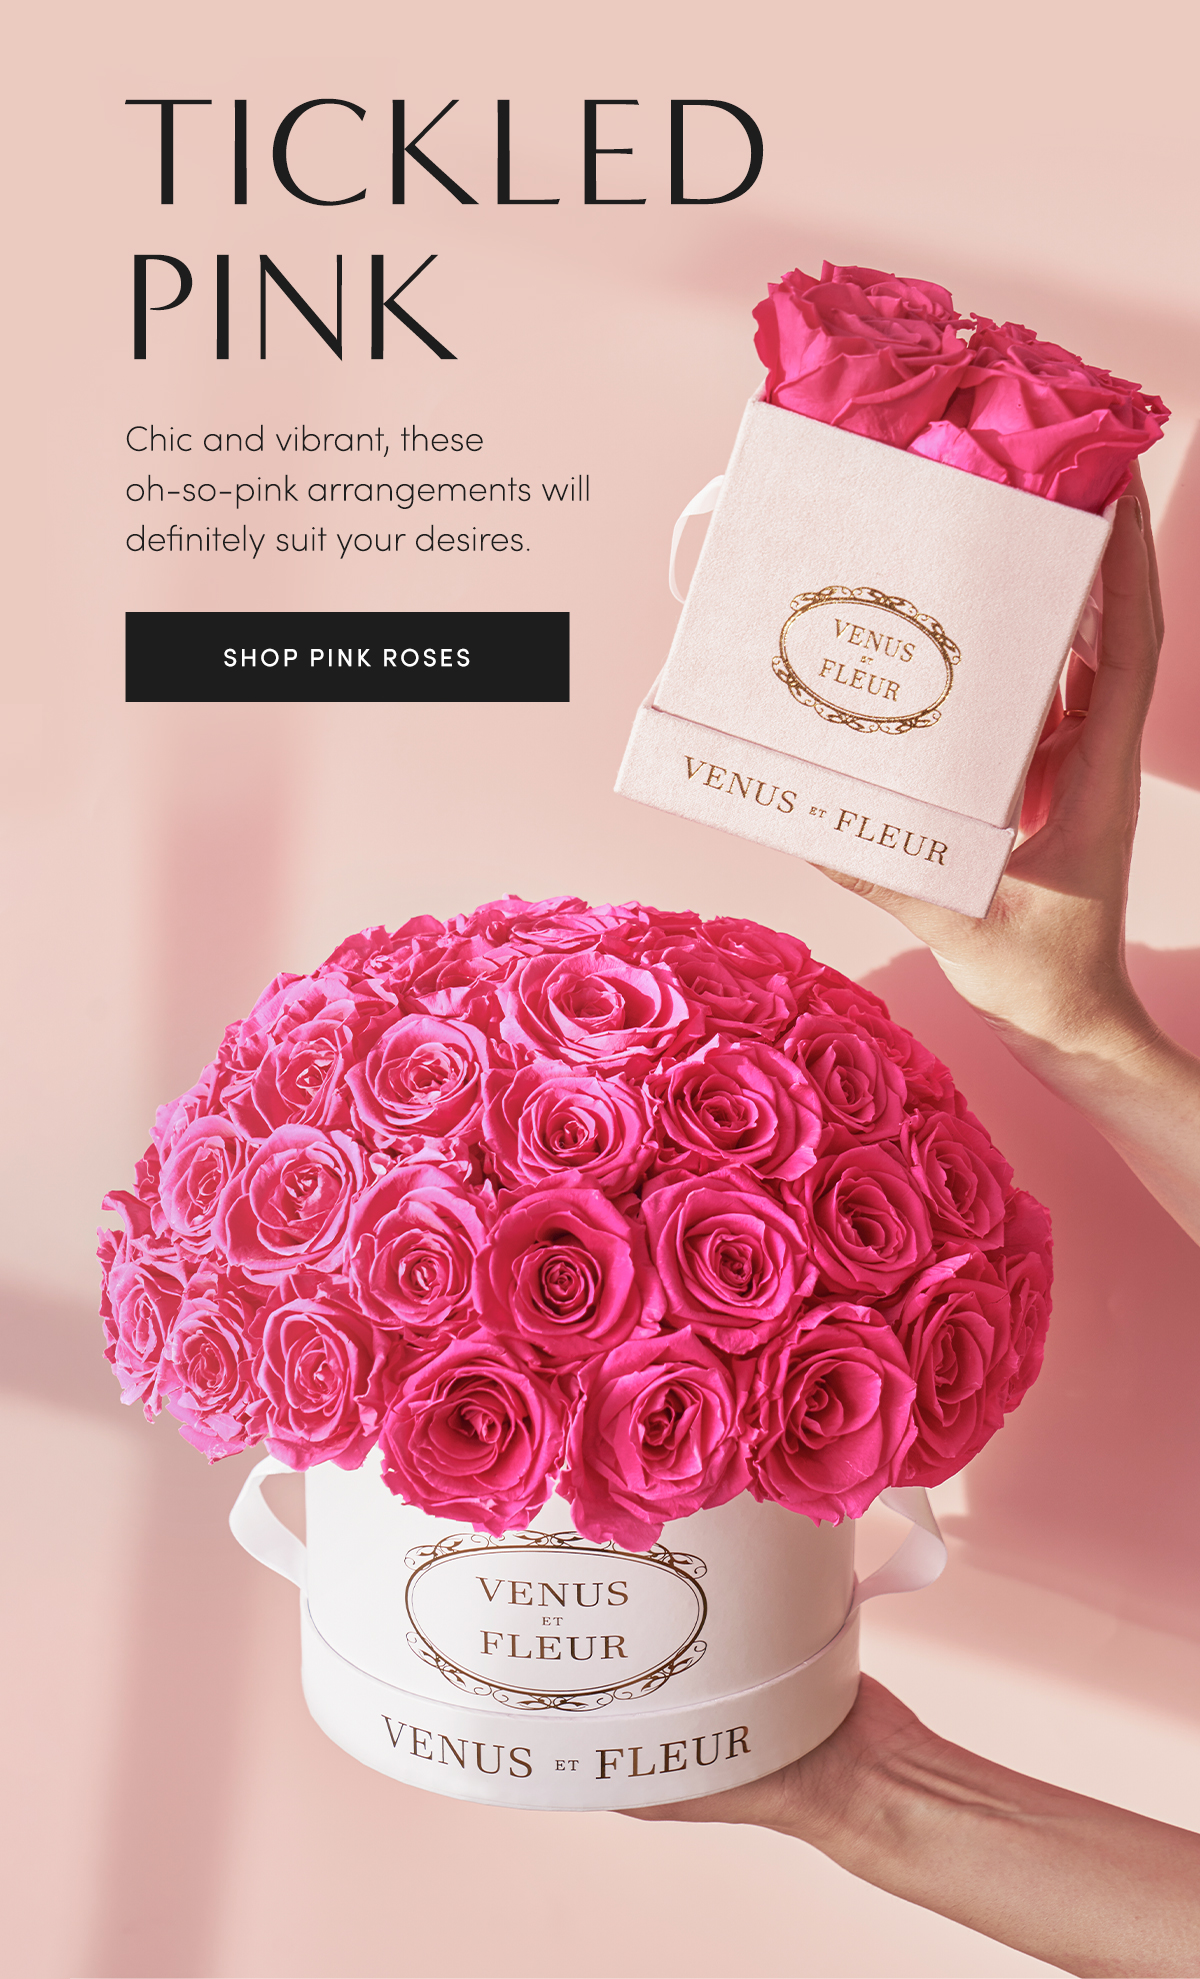 TICKLED PINK | Chic and vibrant, these oh-so-pink arrangements will definitely suit your desires. | SHOP PINK ROSES